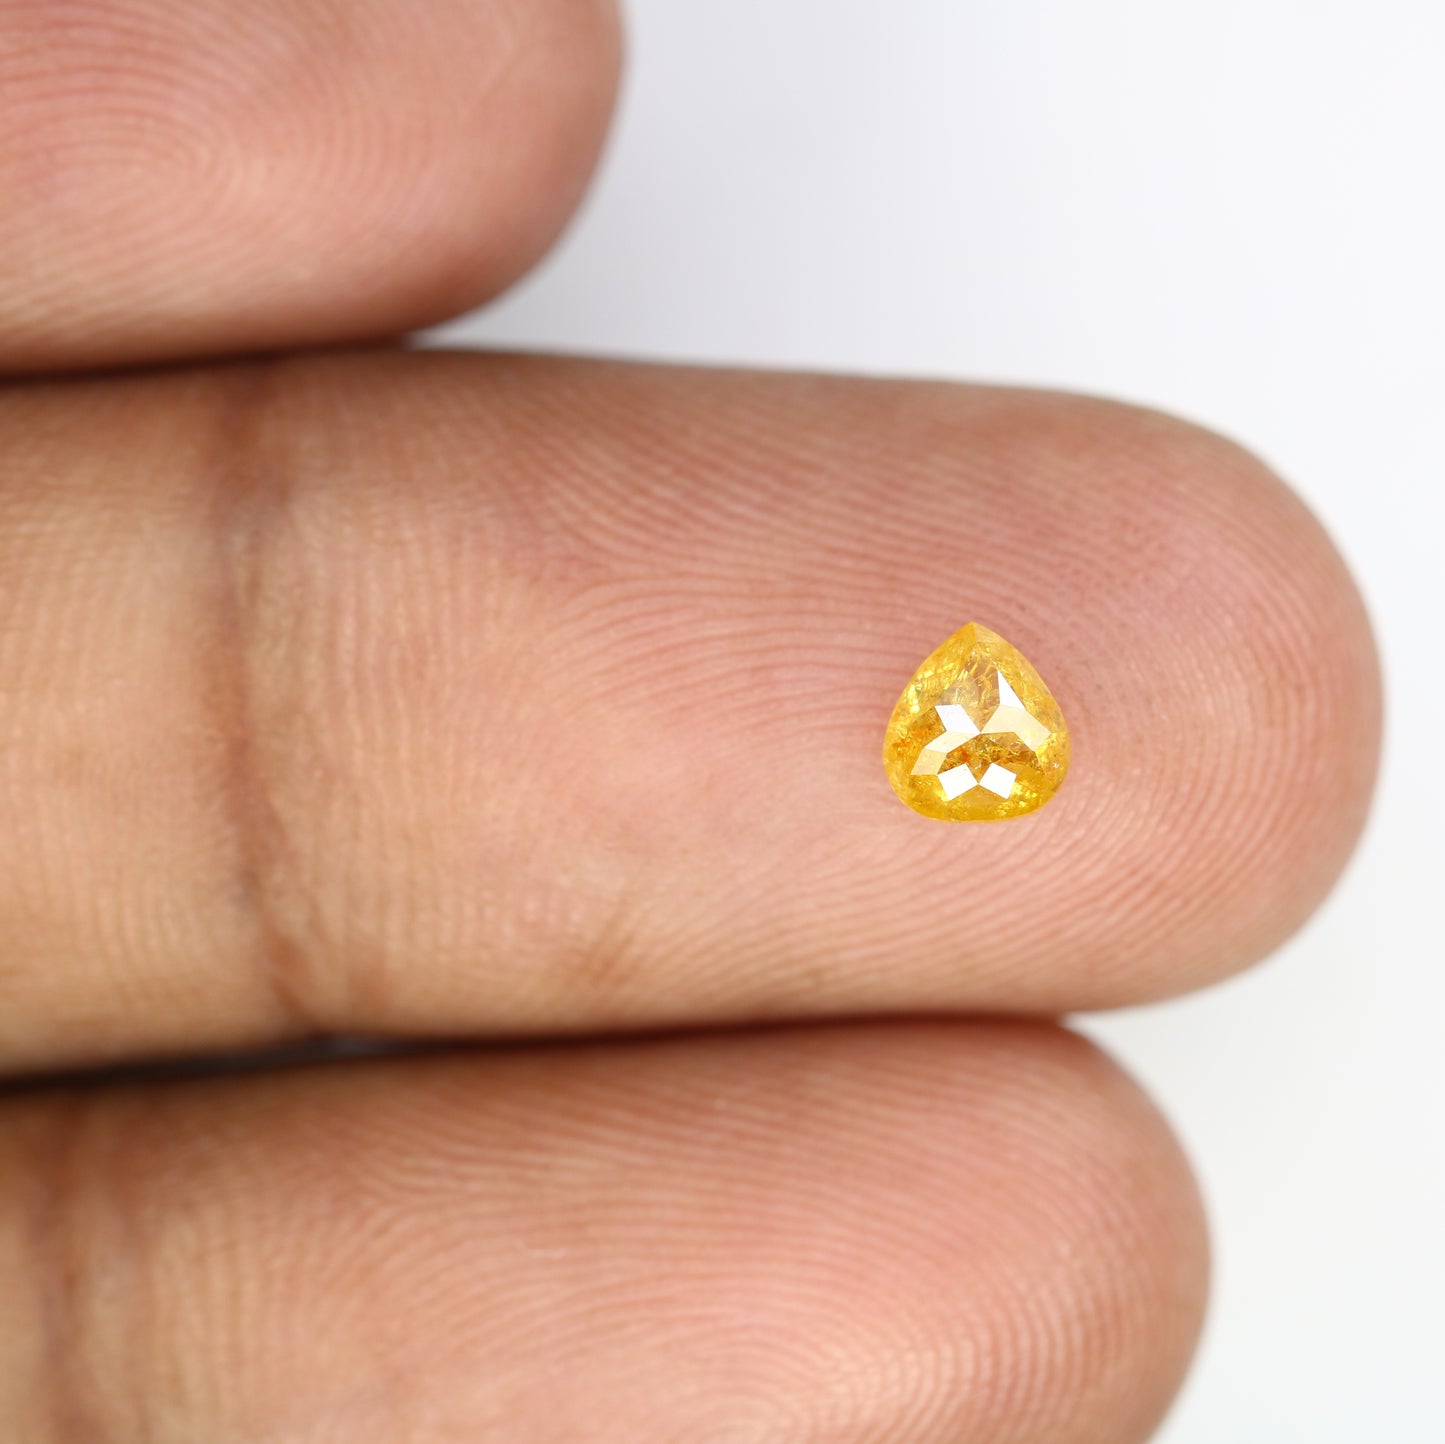 0.49 CT 5.20 MM Fancy Yellow Pear Shape Diamond For Engagement Ring